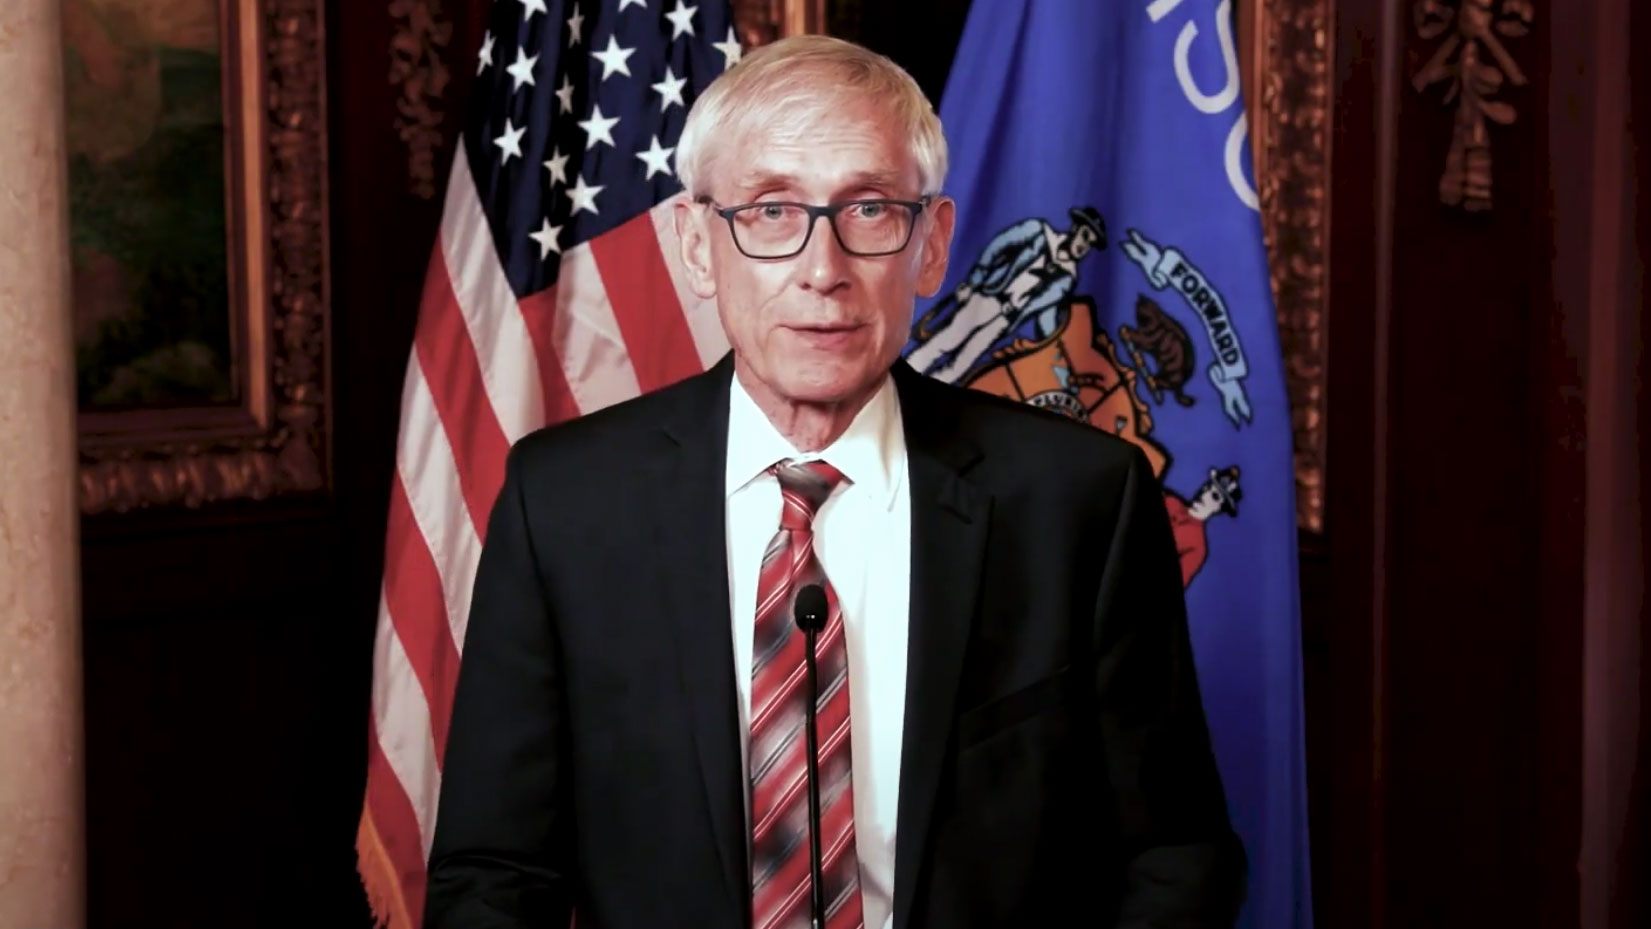 Evers Issues New Mask Mandate Hours After GOP Votes to Repeal